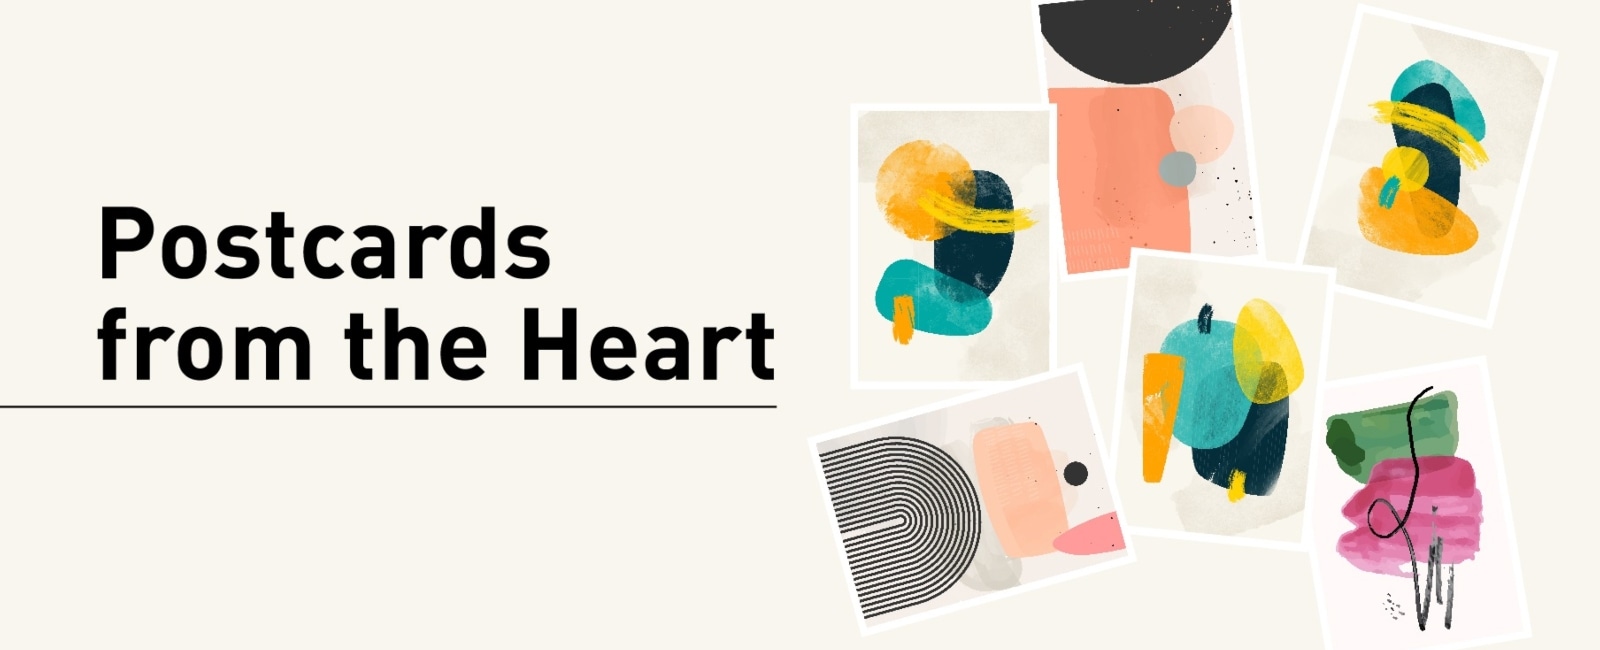 Drop-in activity: Postcards from the Heart